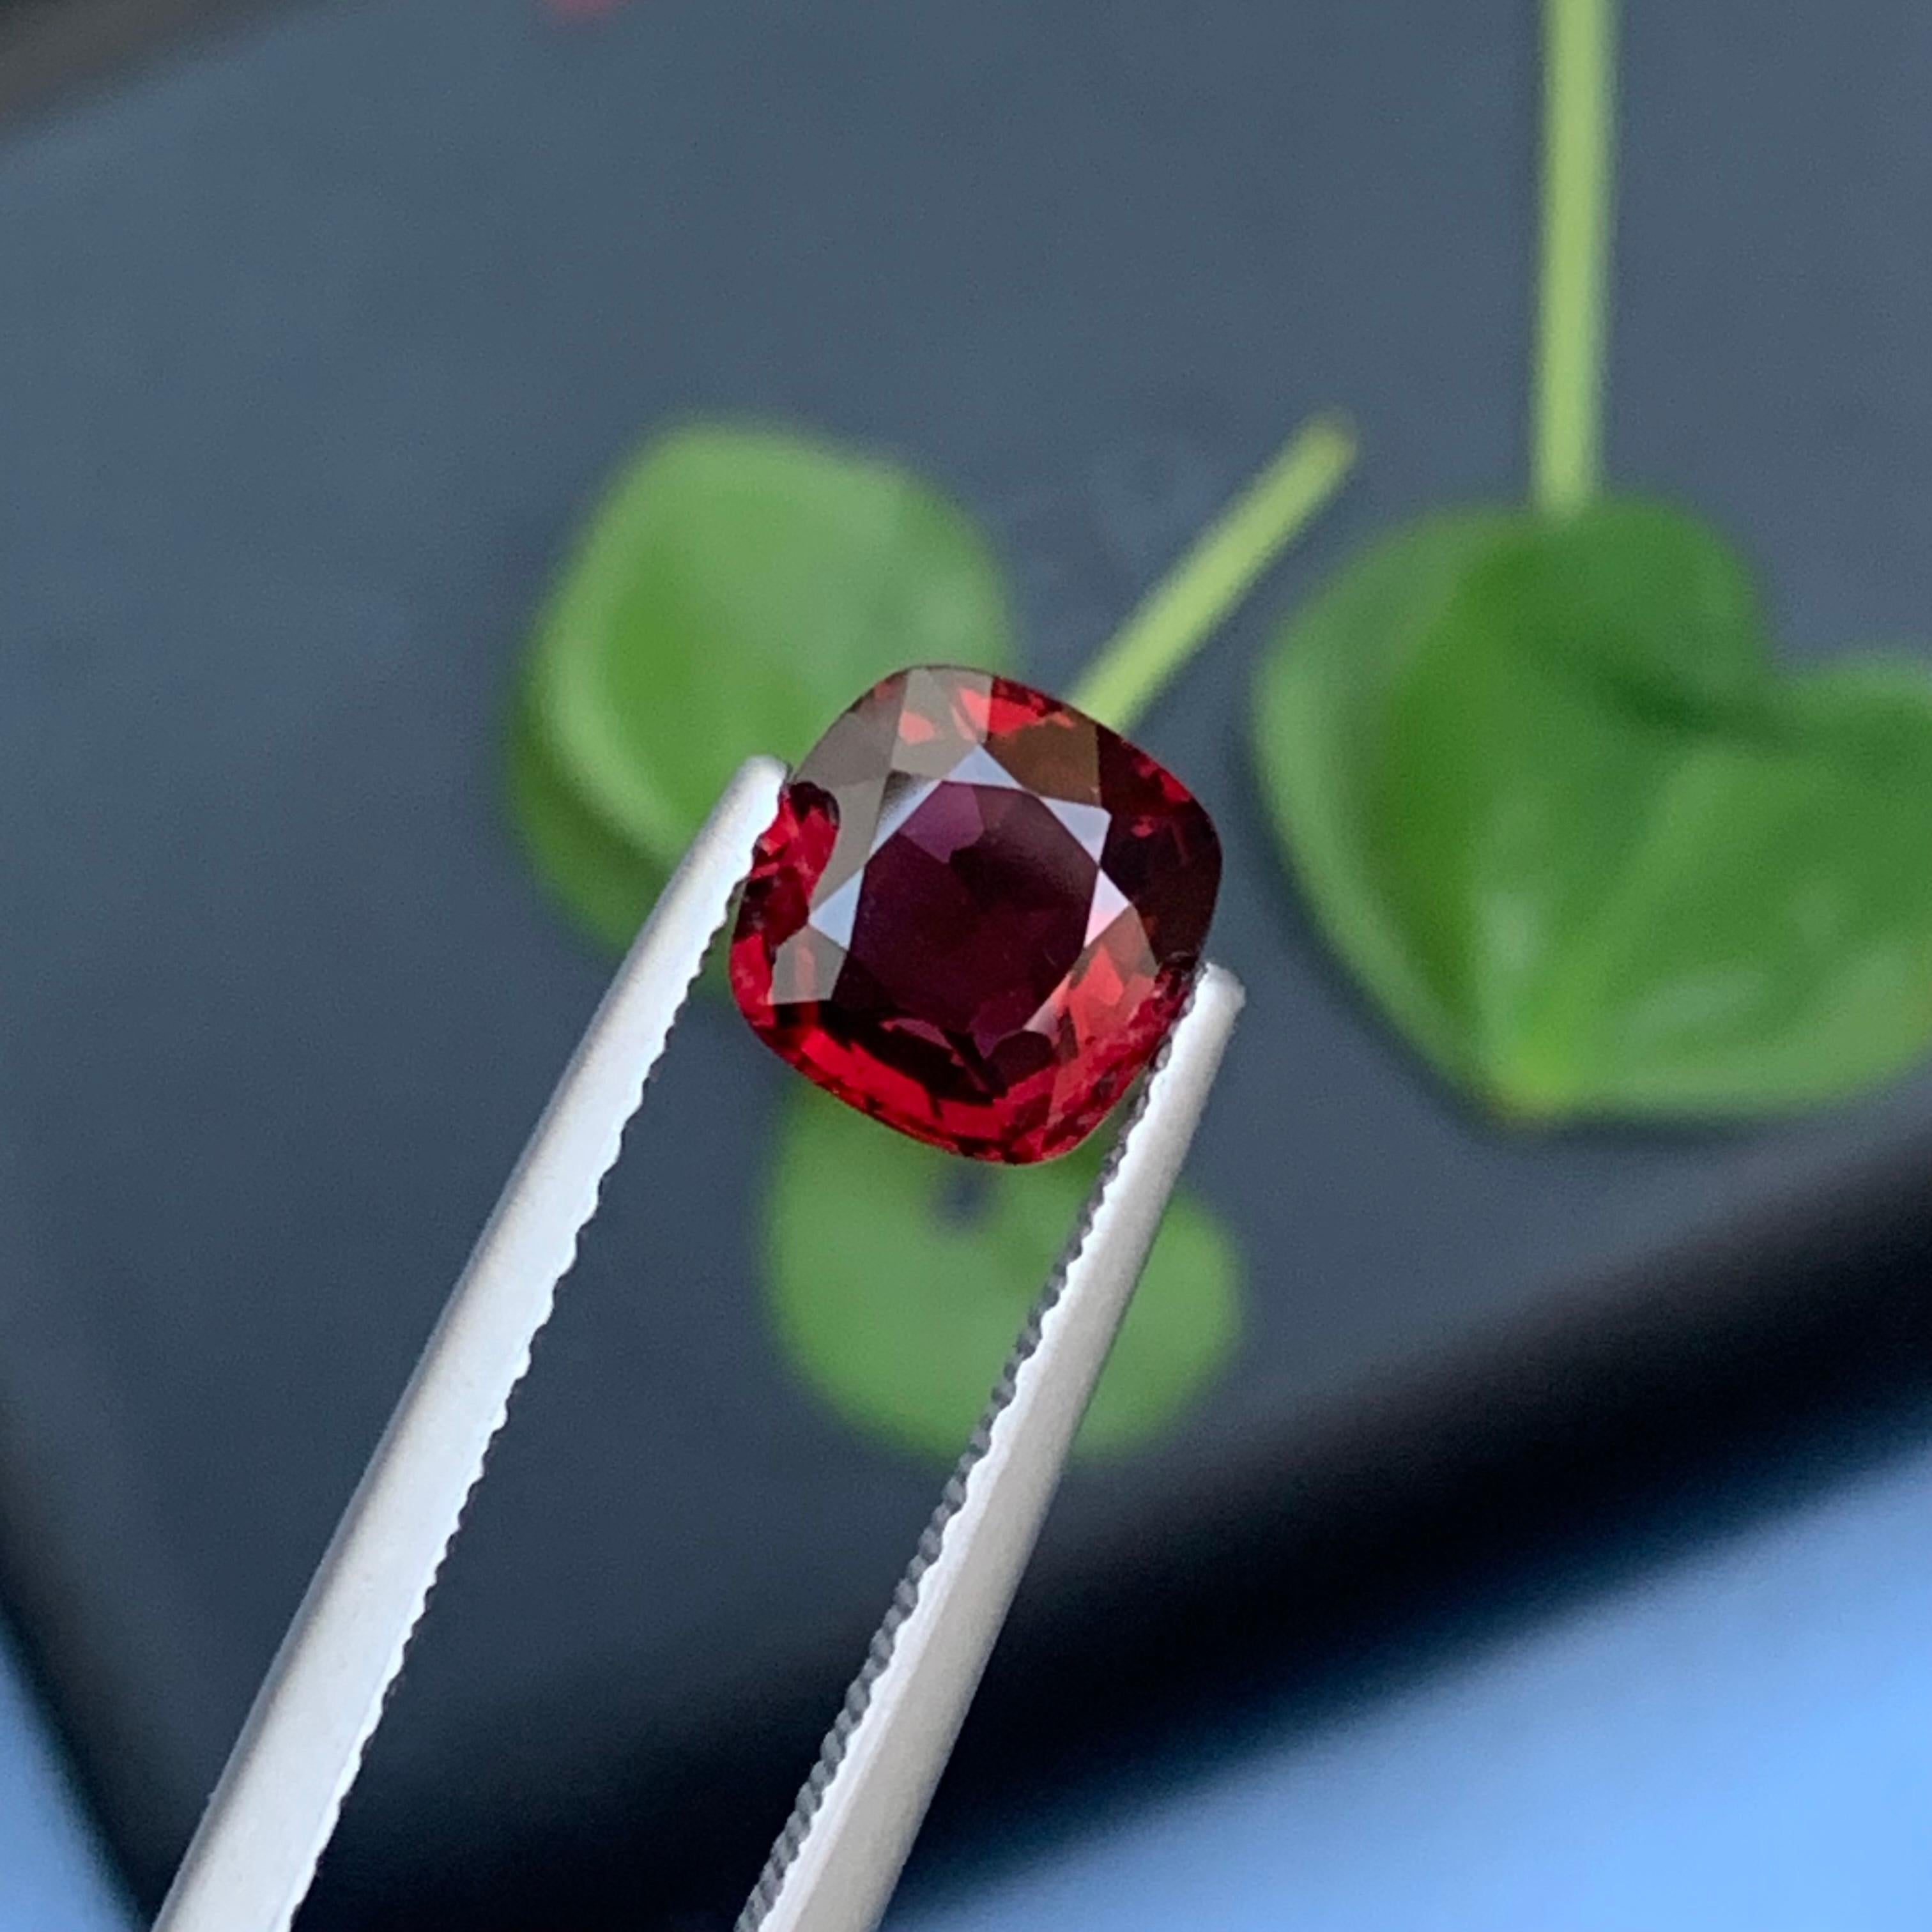 Stunning 1.60 Carat Natural Loose Red Spinel from Myanmar Burma Cushion Shape 2